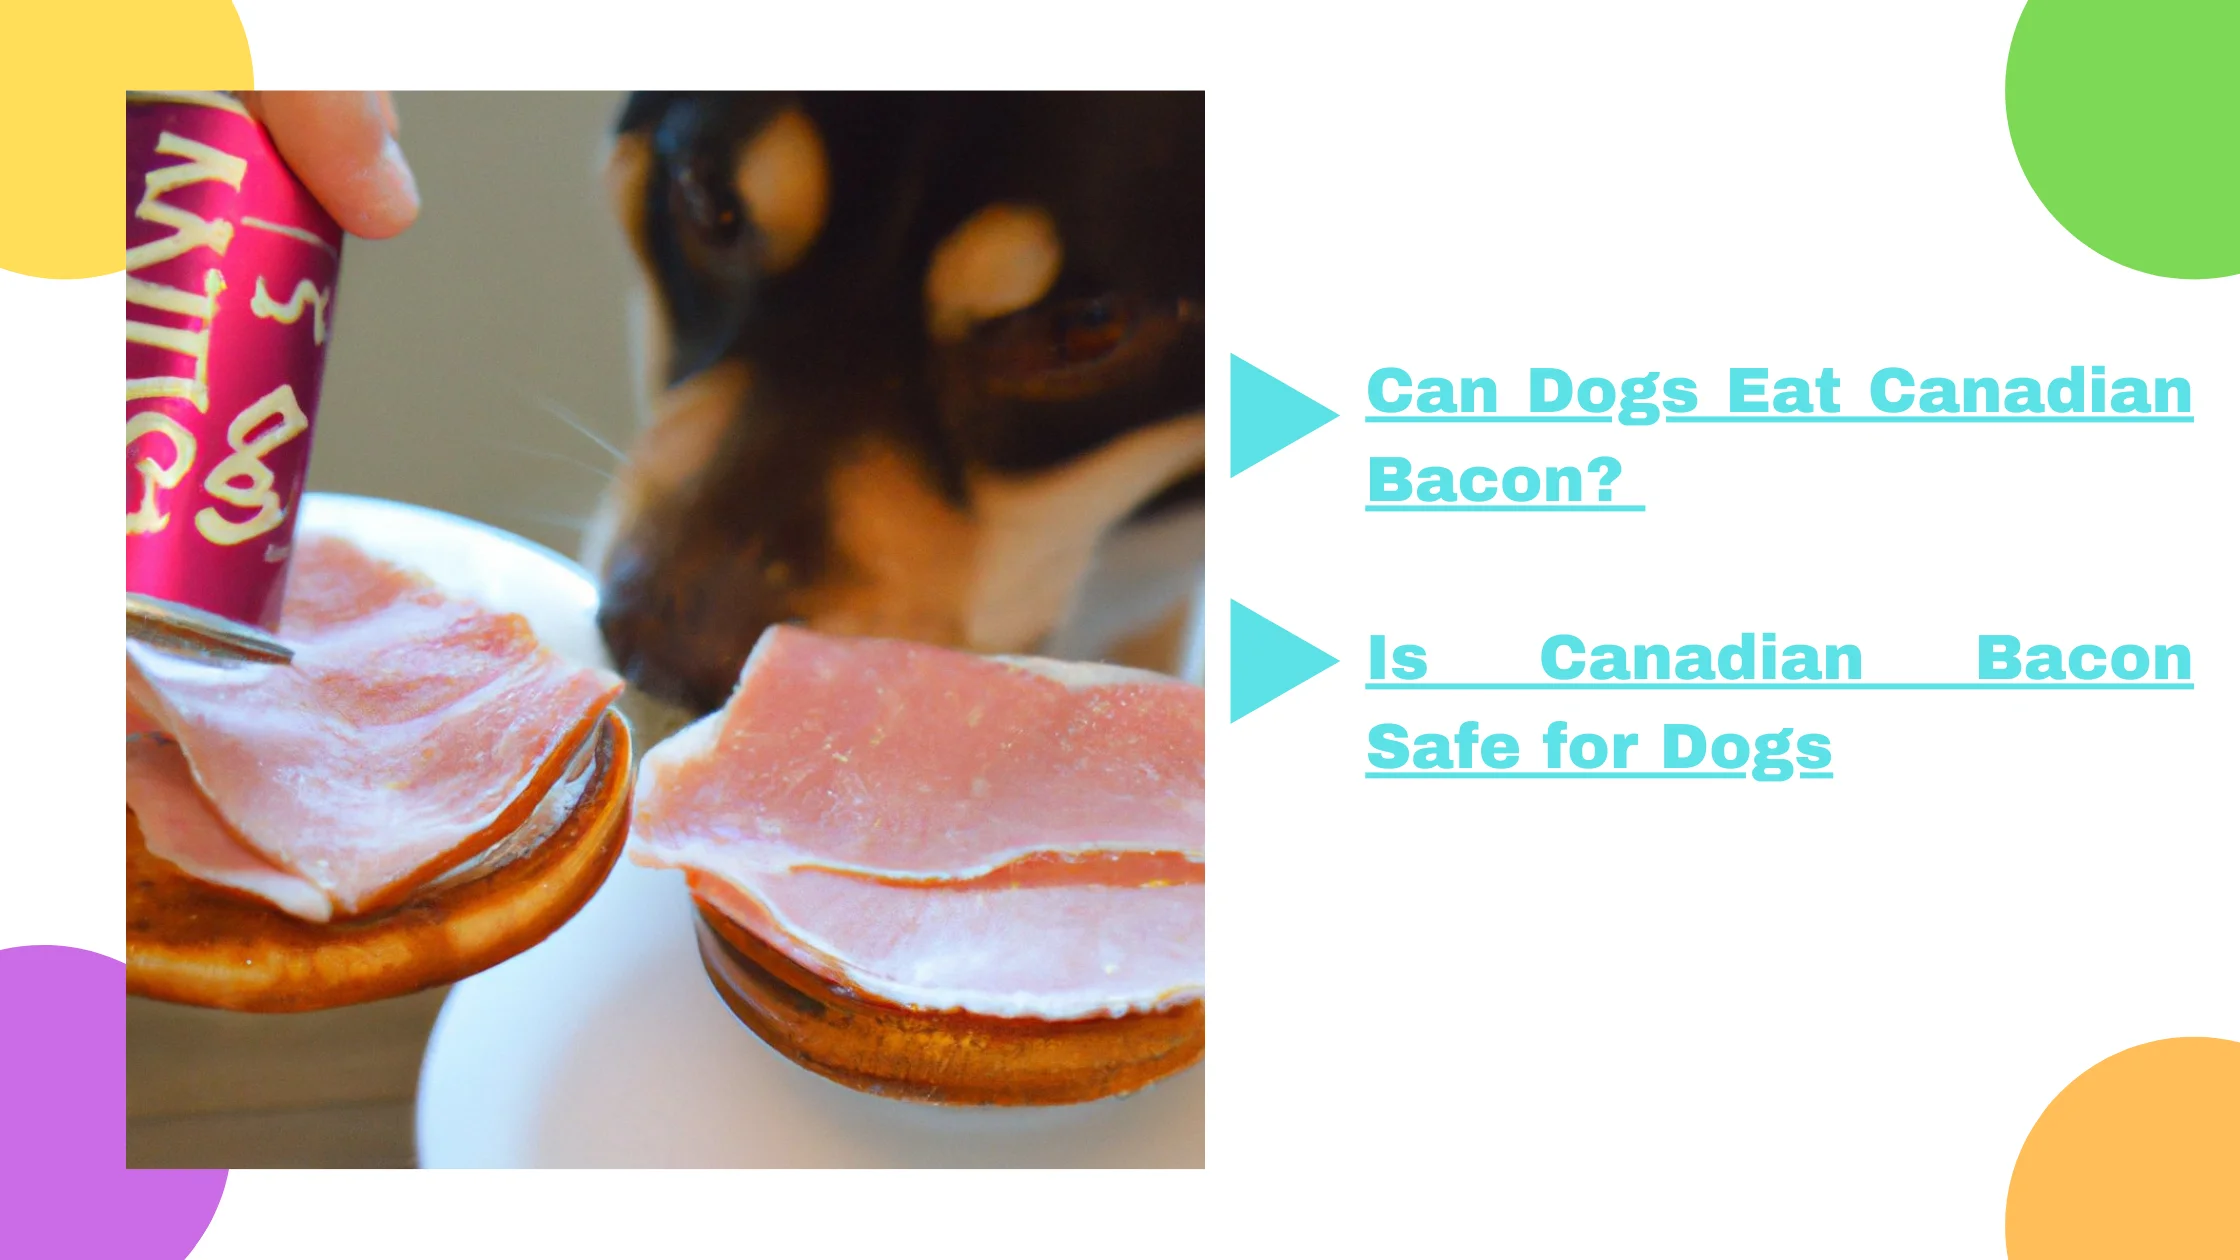 Can Dogs Eat Canadian Bacon